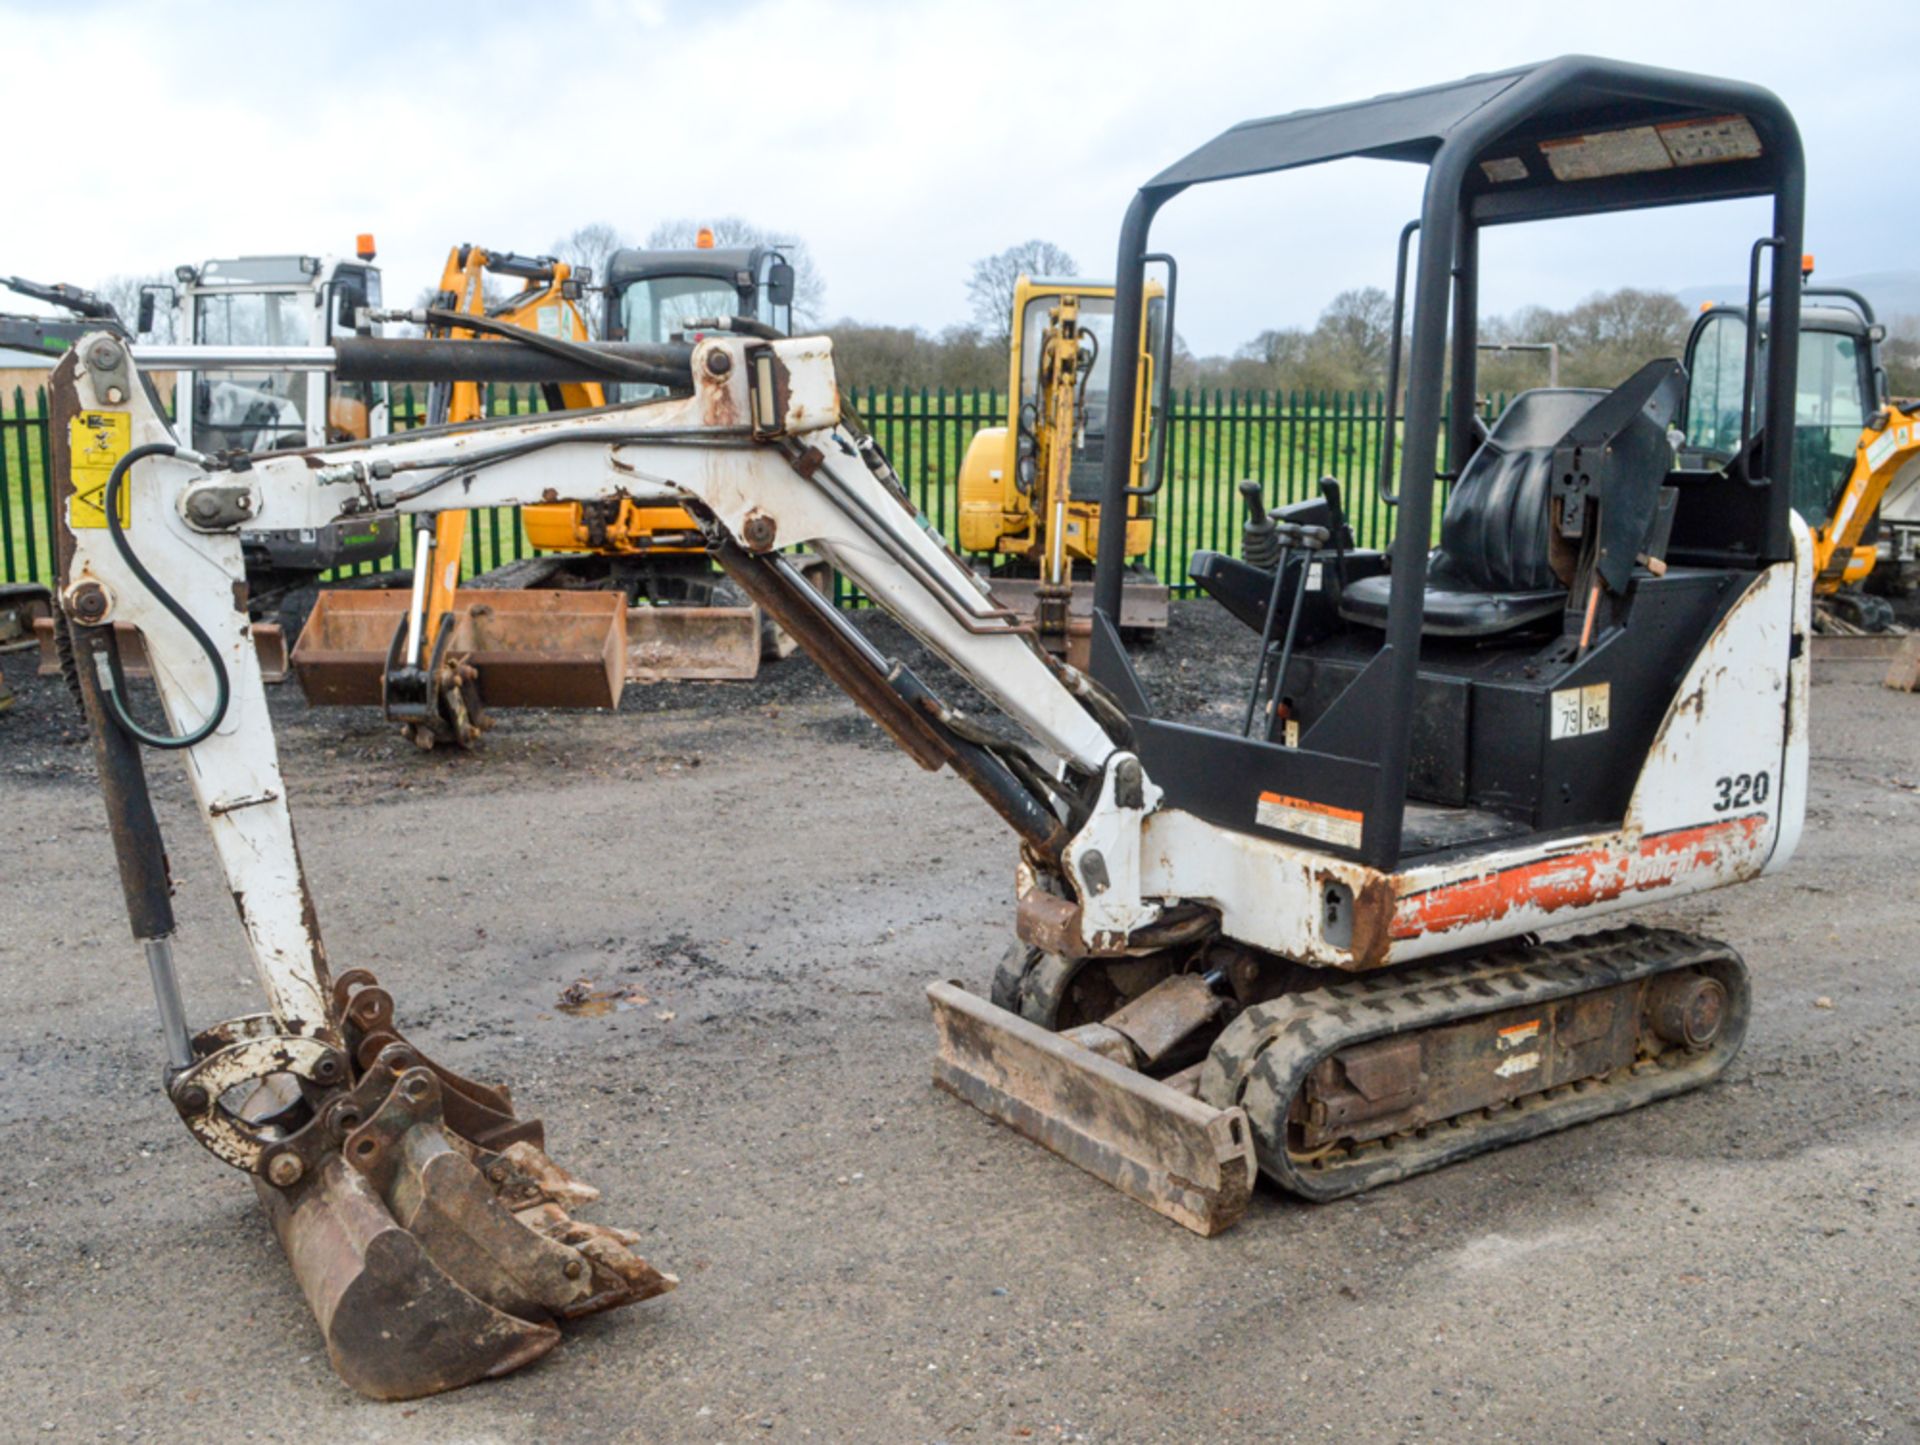 Bobcat 320 1.5 tonne rubber tracked mini excavator Year: S/N: Recorded Hours: 2324 blade & 3